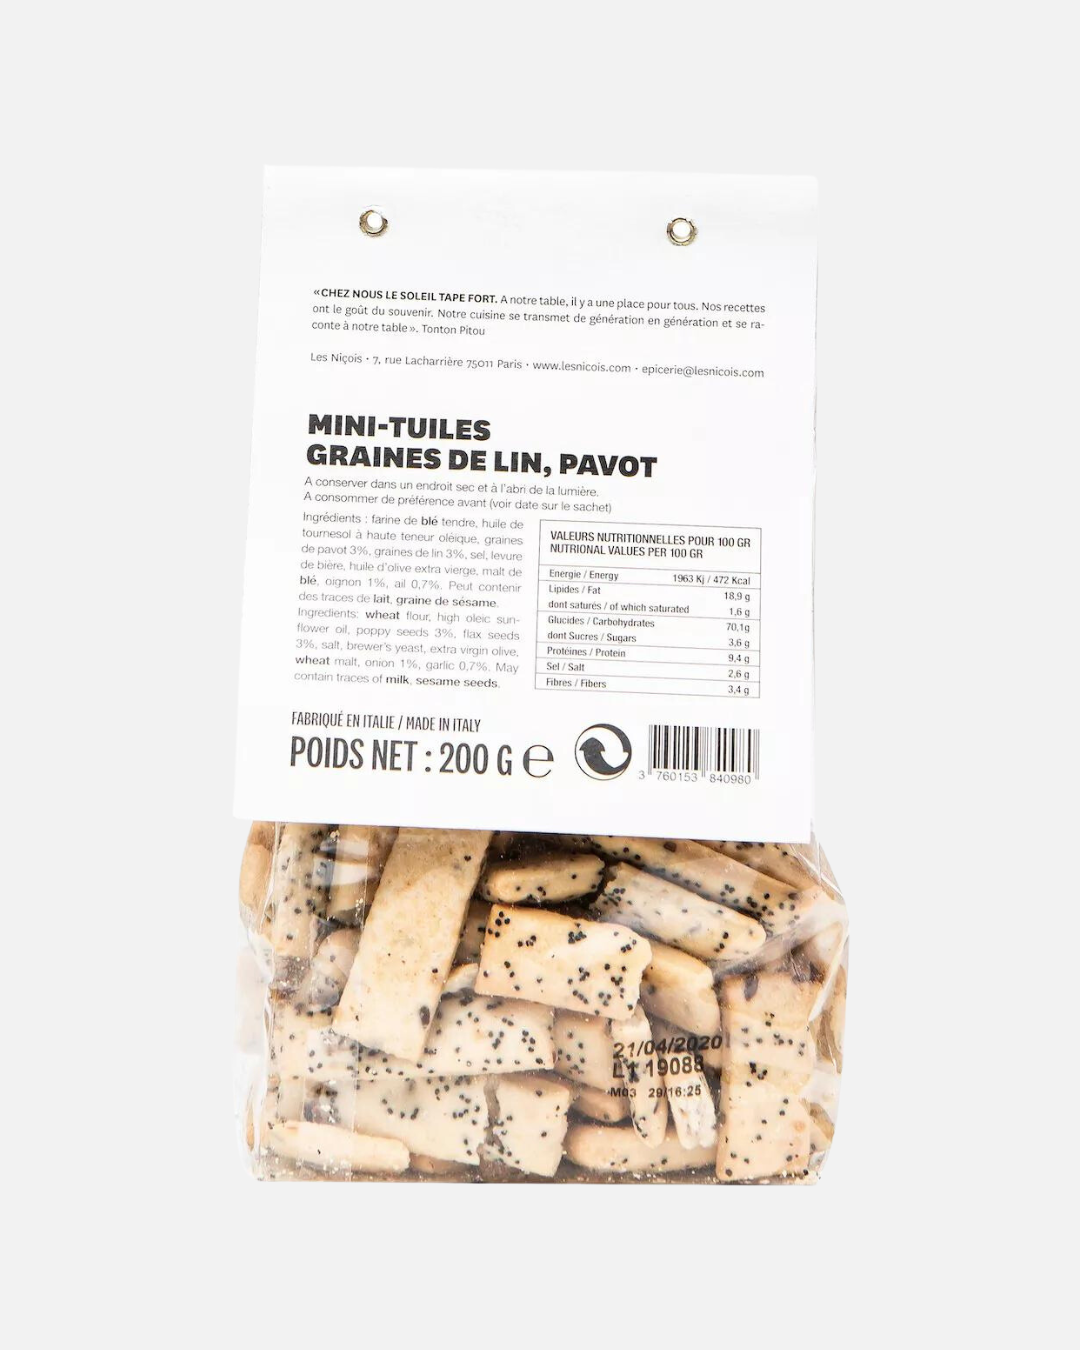 Crackers with Flaxseeds and Poppy Seeds from Tonton Jilou, 200g